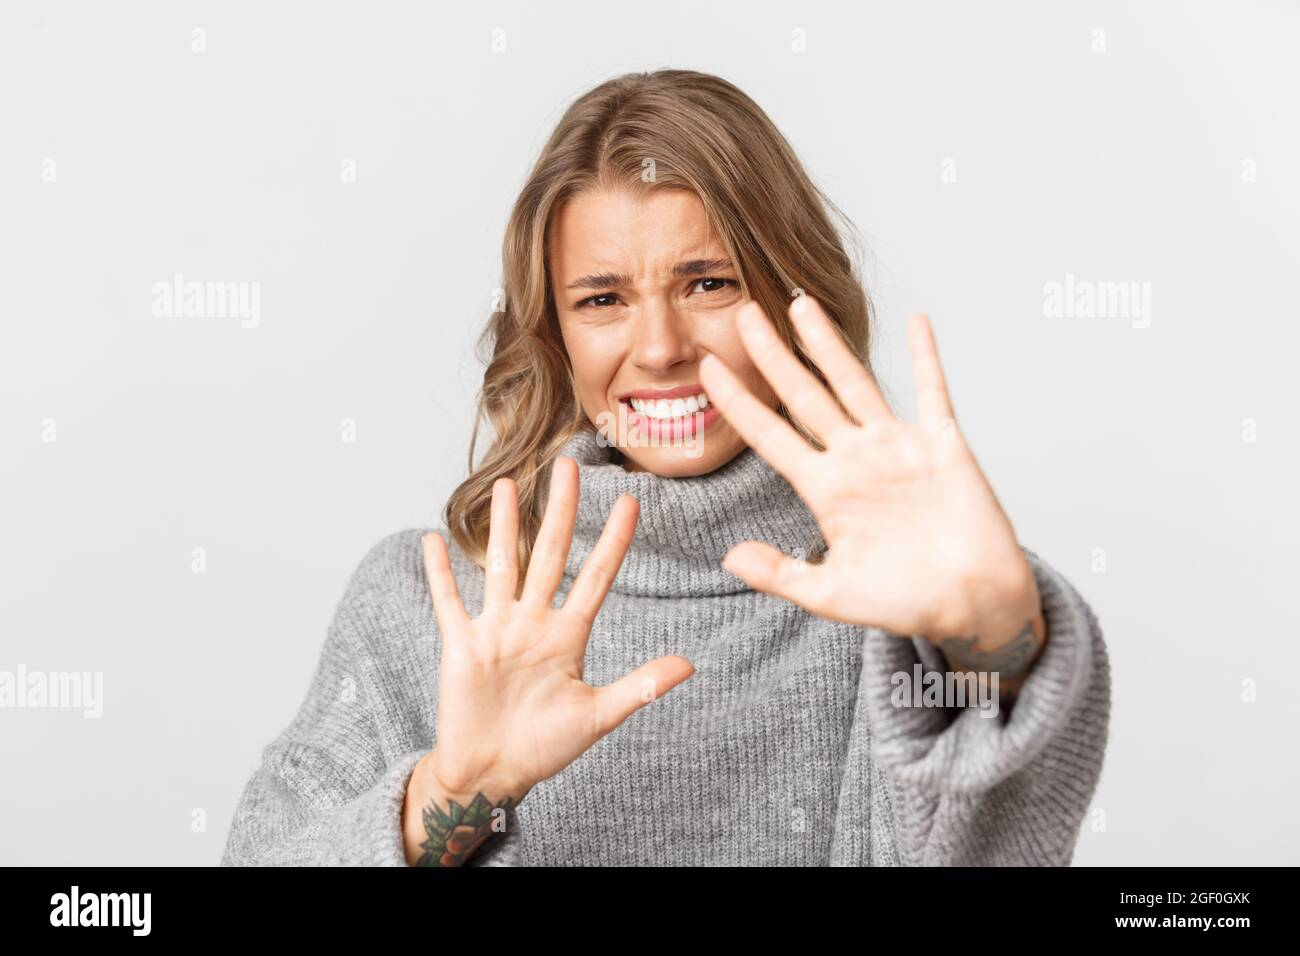 Close-up of bothered blond girl defending herself, grimacing from something disgusting or too bright, standing over white background Stock Photo